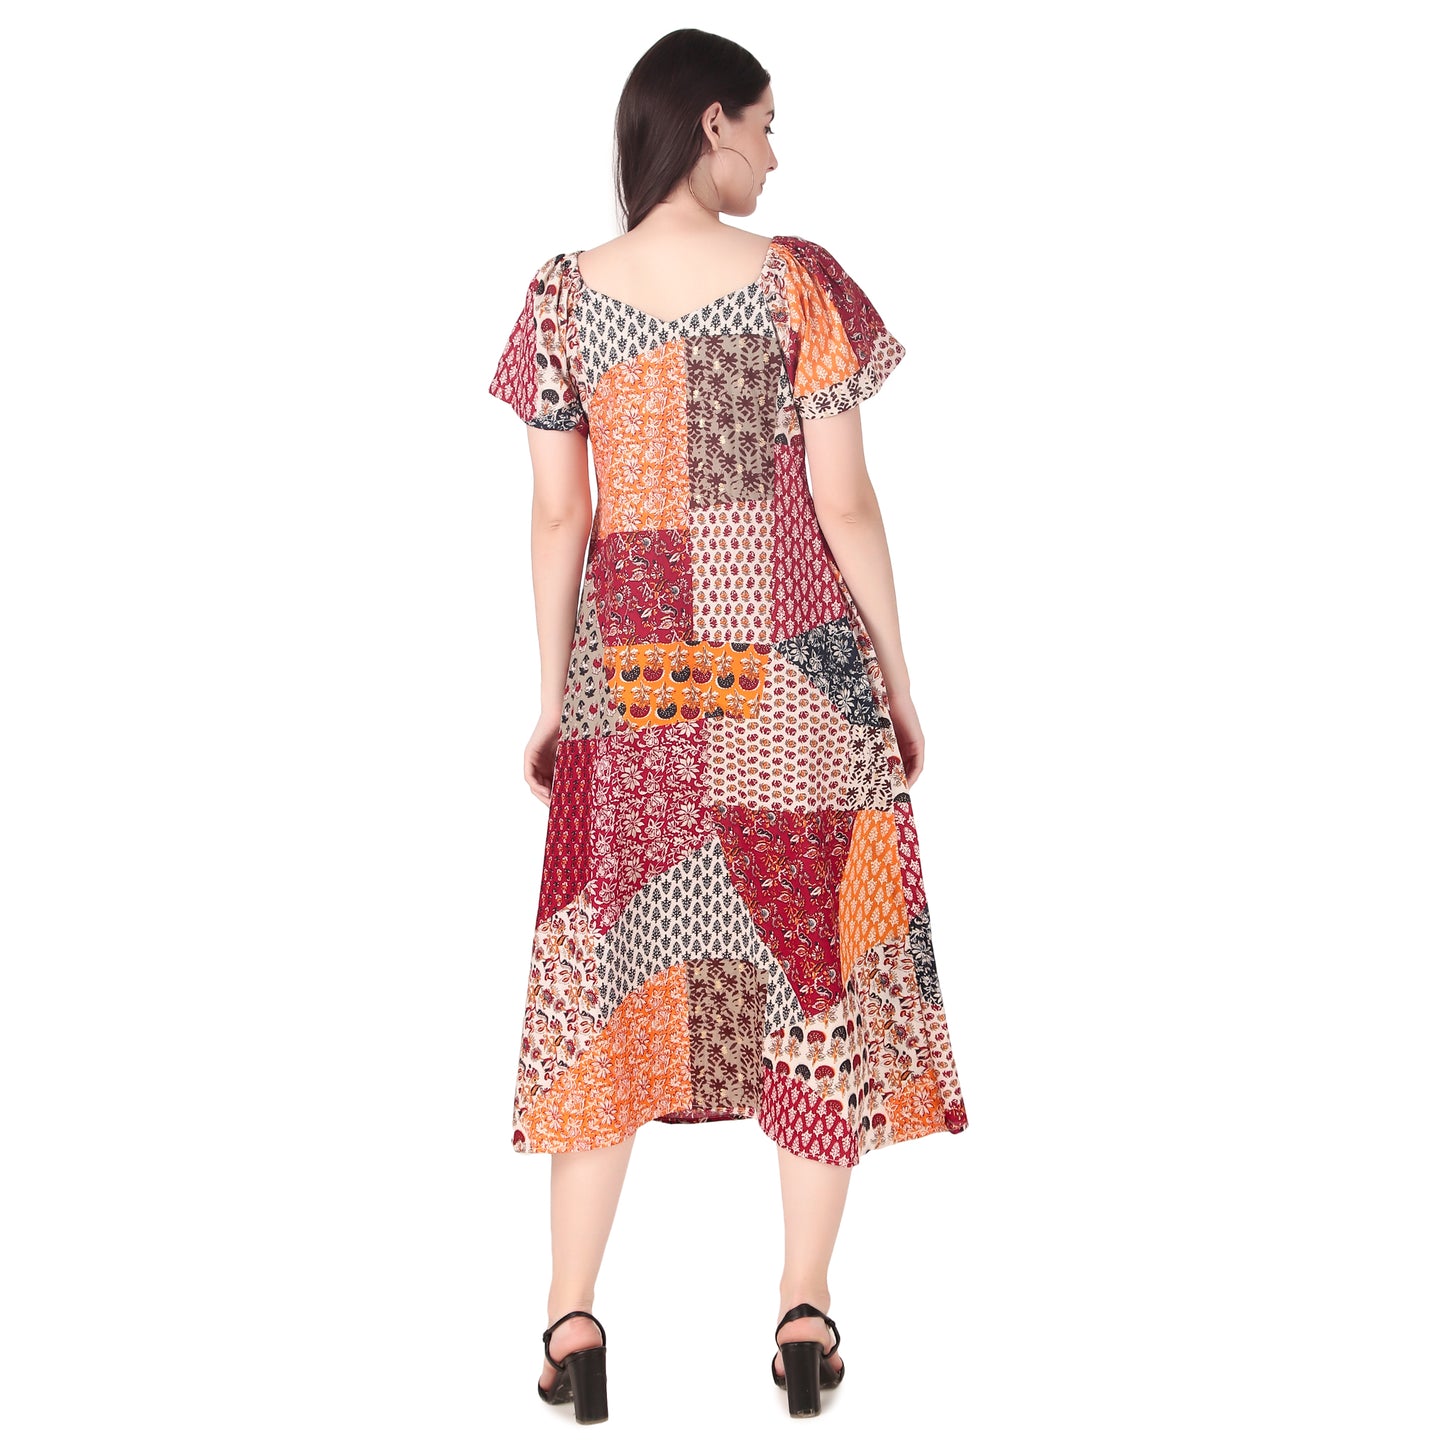 Magnetism printed patch work  Dress for Women